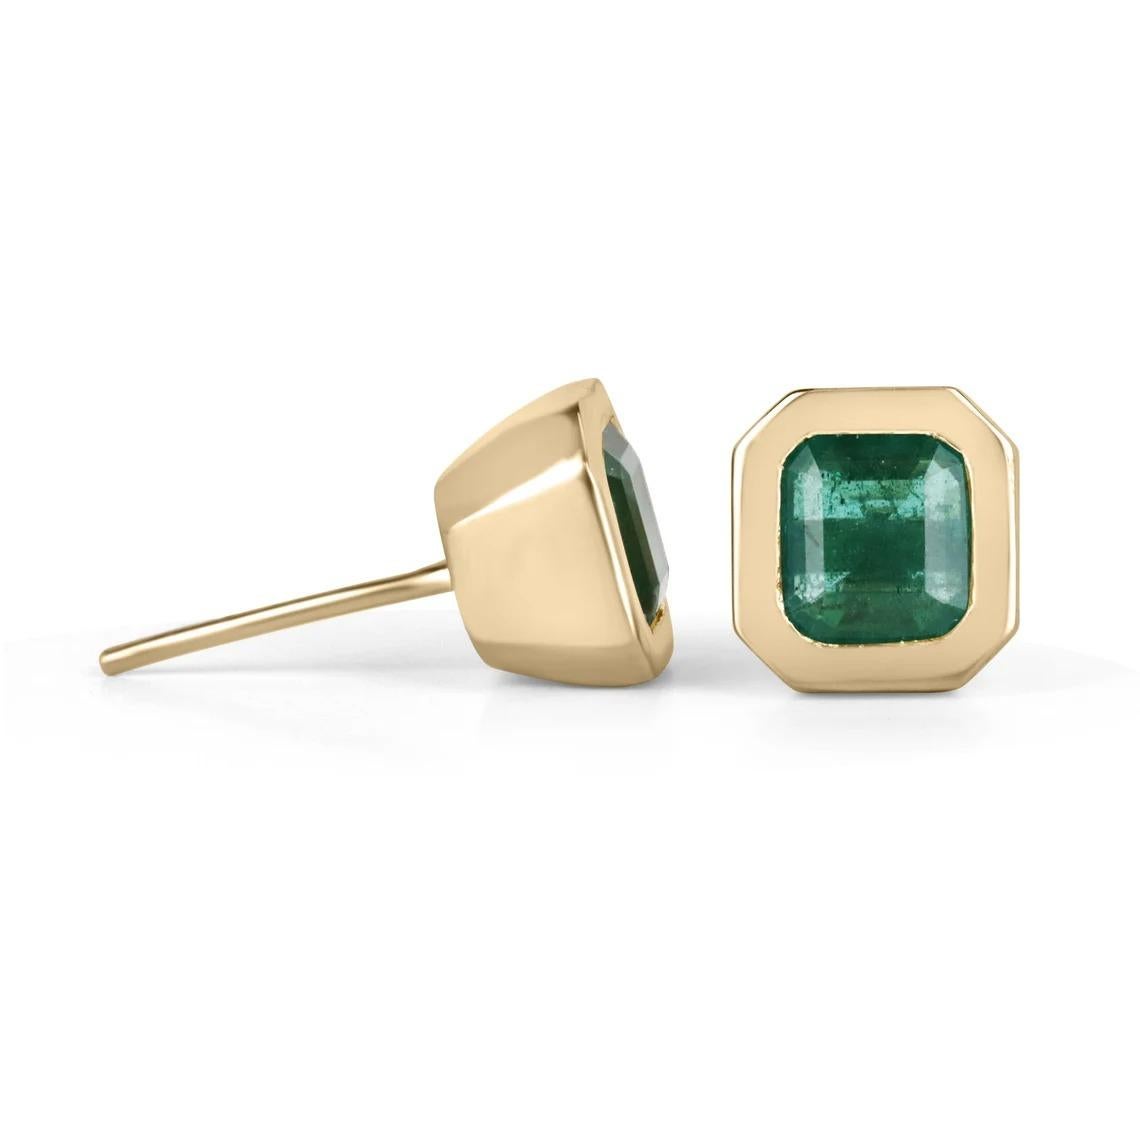 Bezel-set green emerald Asscher cut stud earrings make a stylish statement in beauty. These 14k gold stud earrings are hand-made by our expert jeweler and showcase 4.20 carats of natural emeralds, showing full earlobe coverage for an impressive